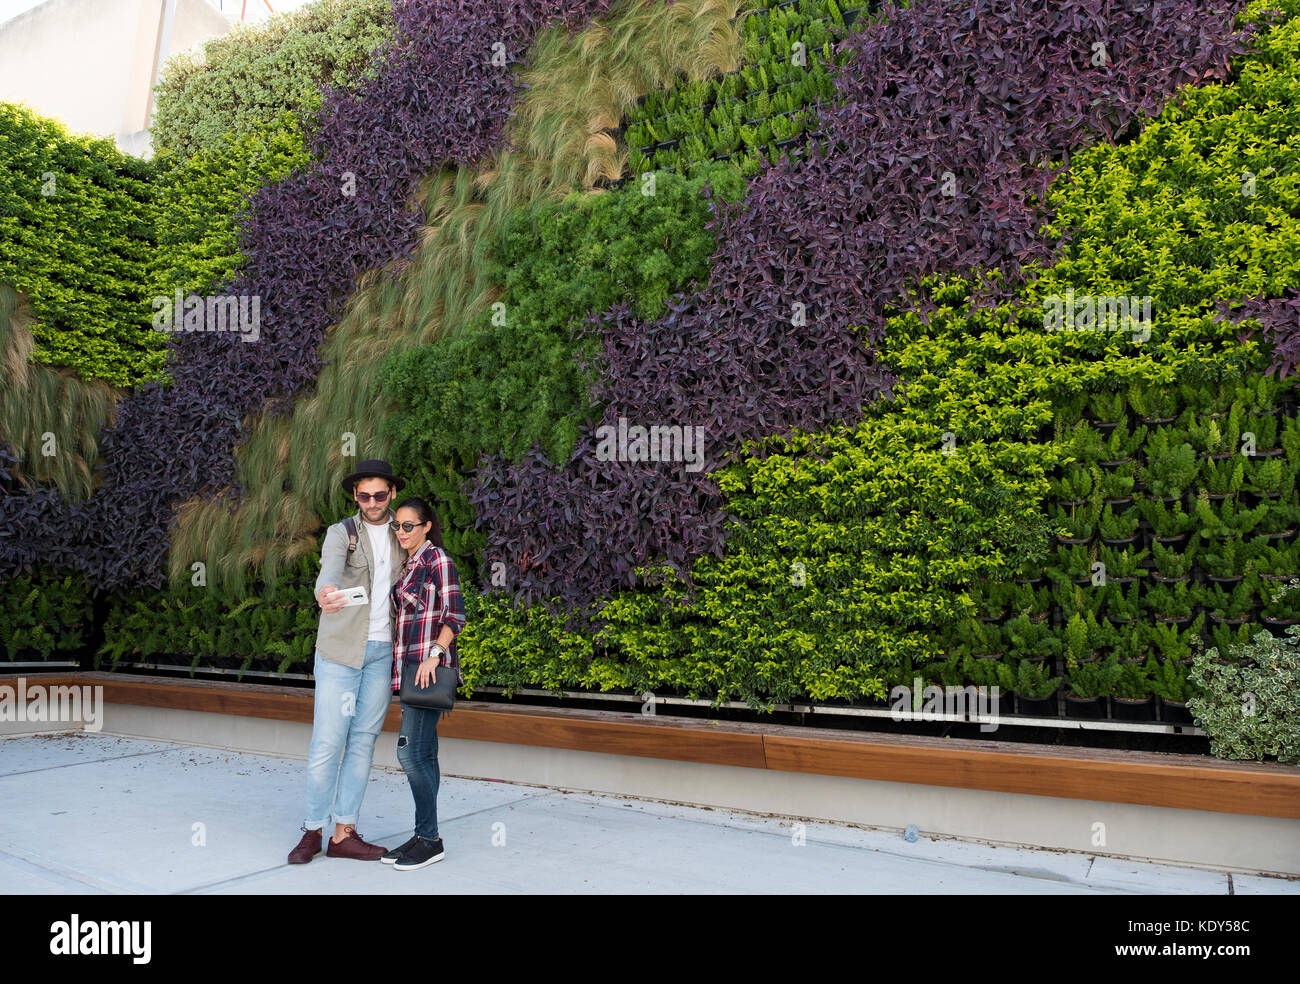 The Green Living Wall in Paphos old town, Cyprus. The vertical garden was created by garden designer Thanasis Evripidou and made off 2,244 plants. Stock Photo